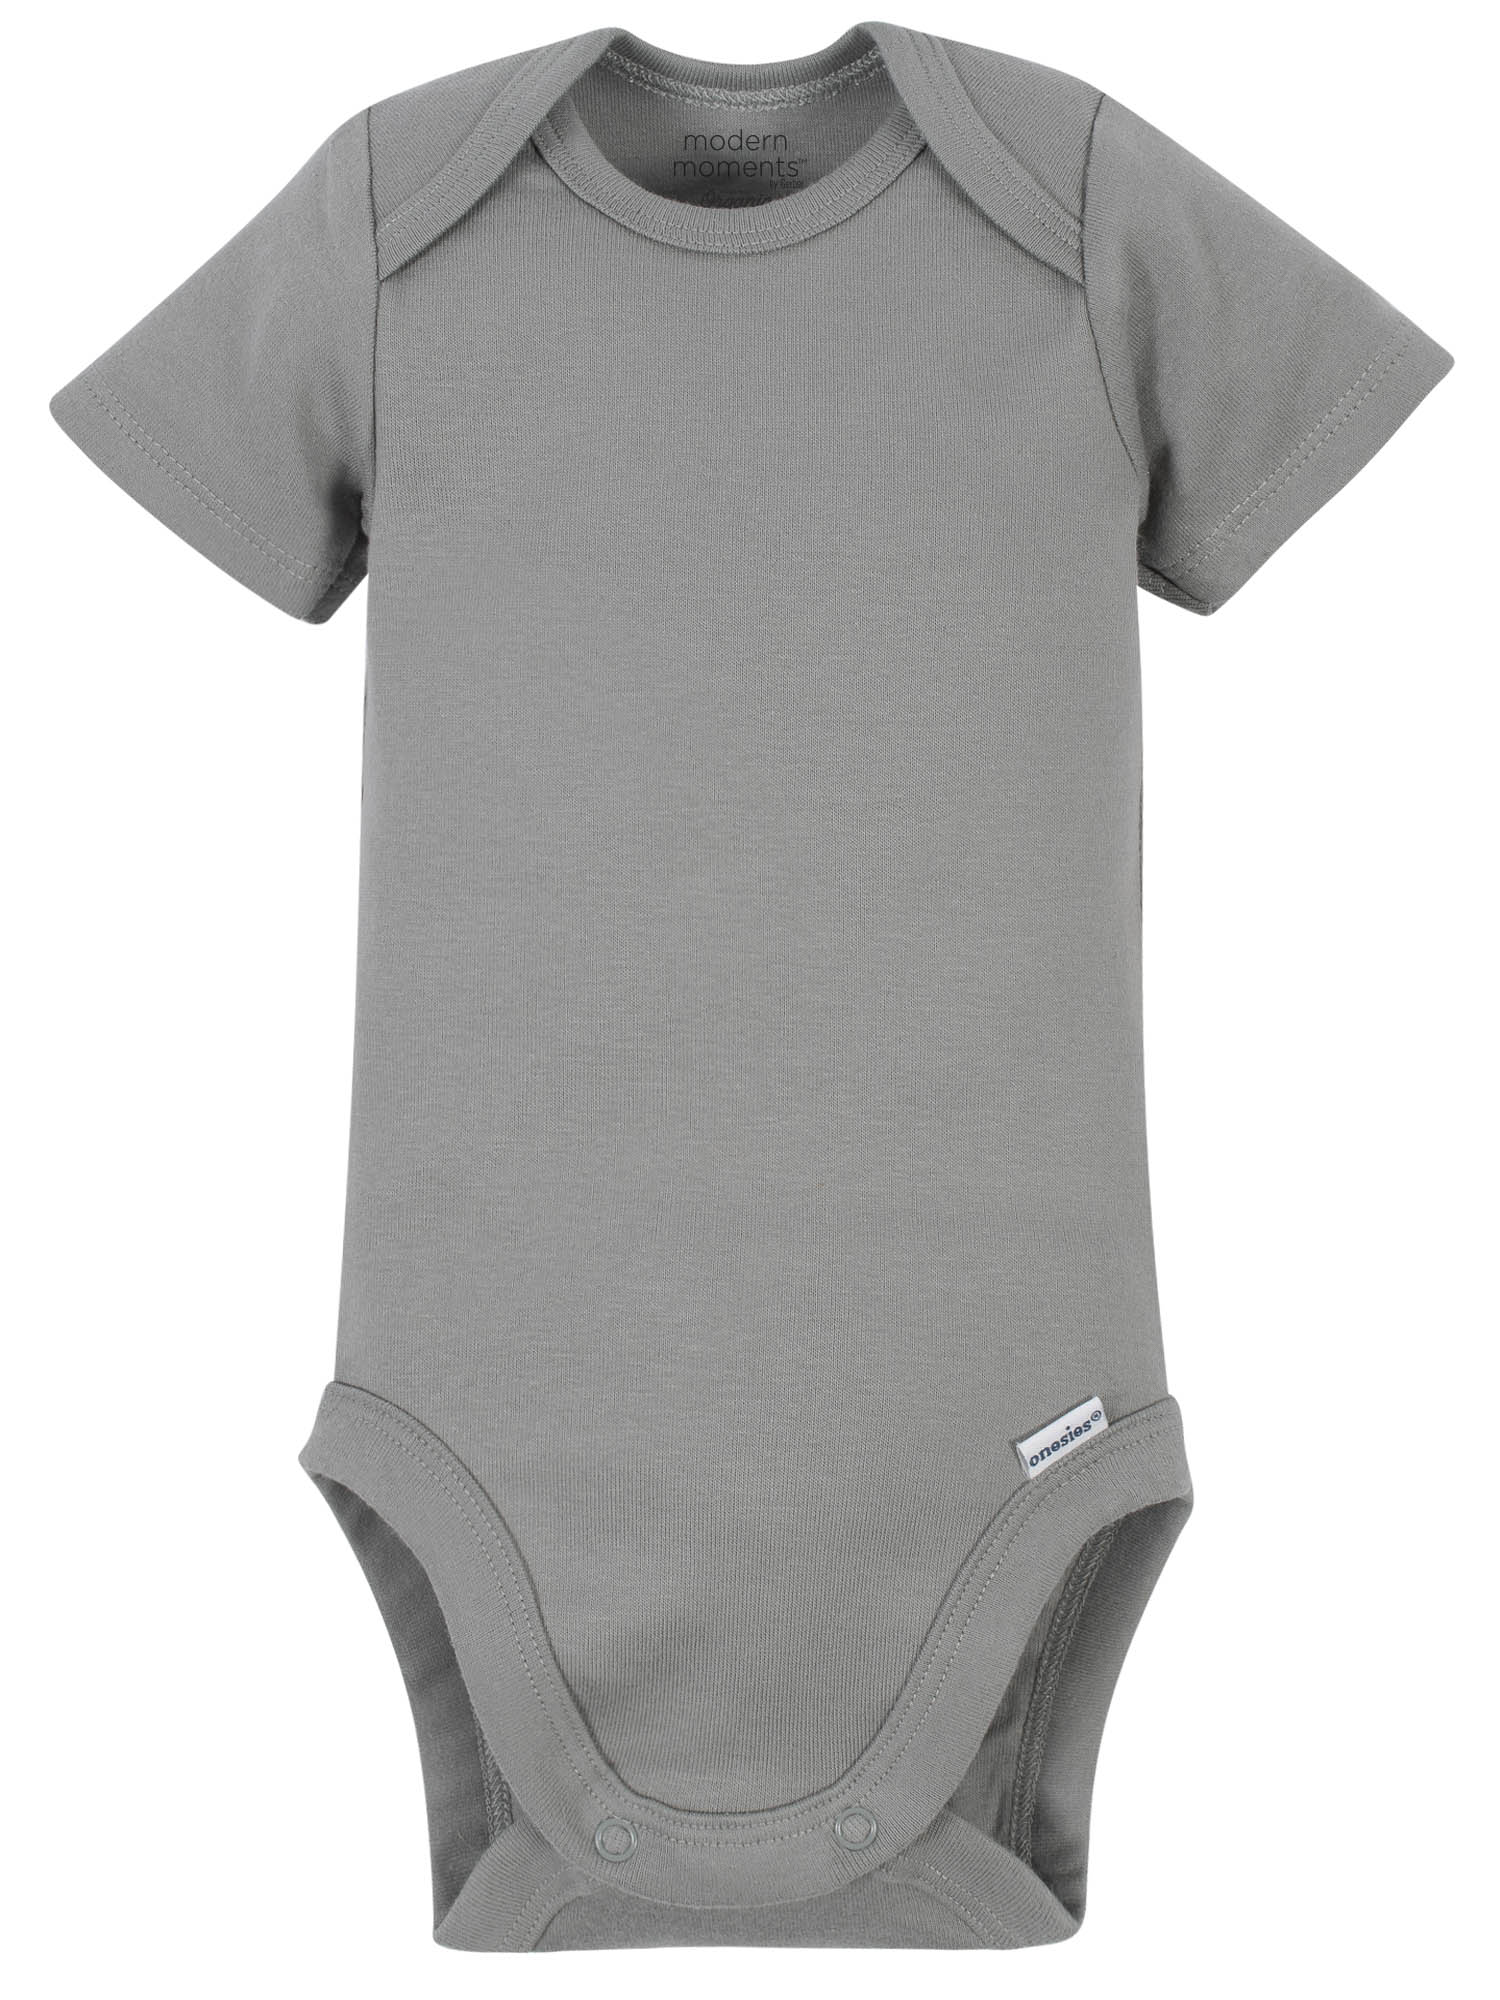 Modern Moments by Gerber Baby Boy Bodysuits, 4-Pack, Newborn-12 Months - image 3 of 6